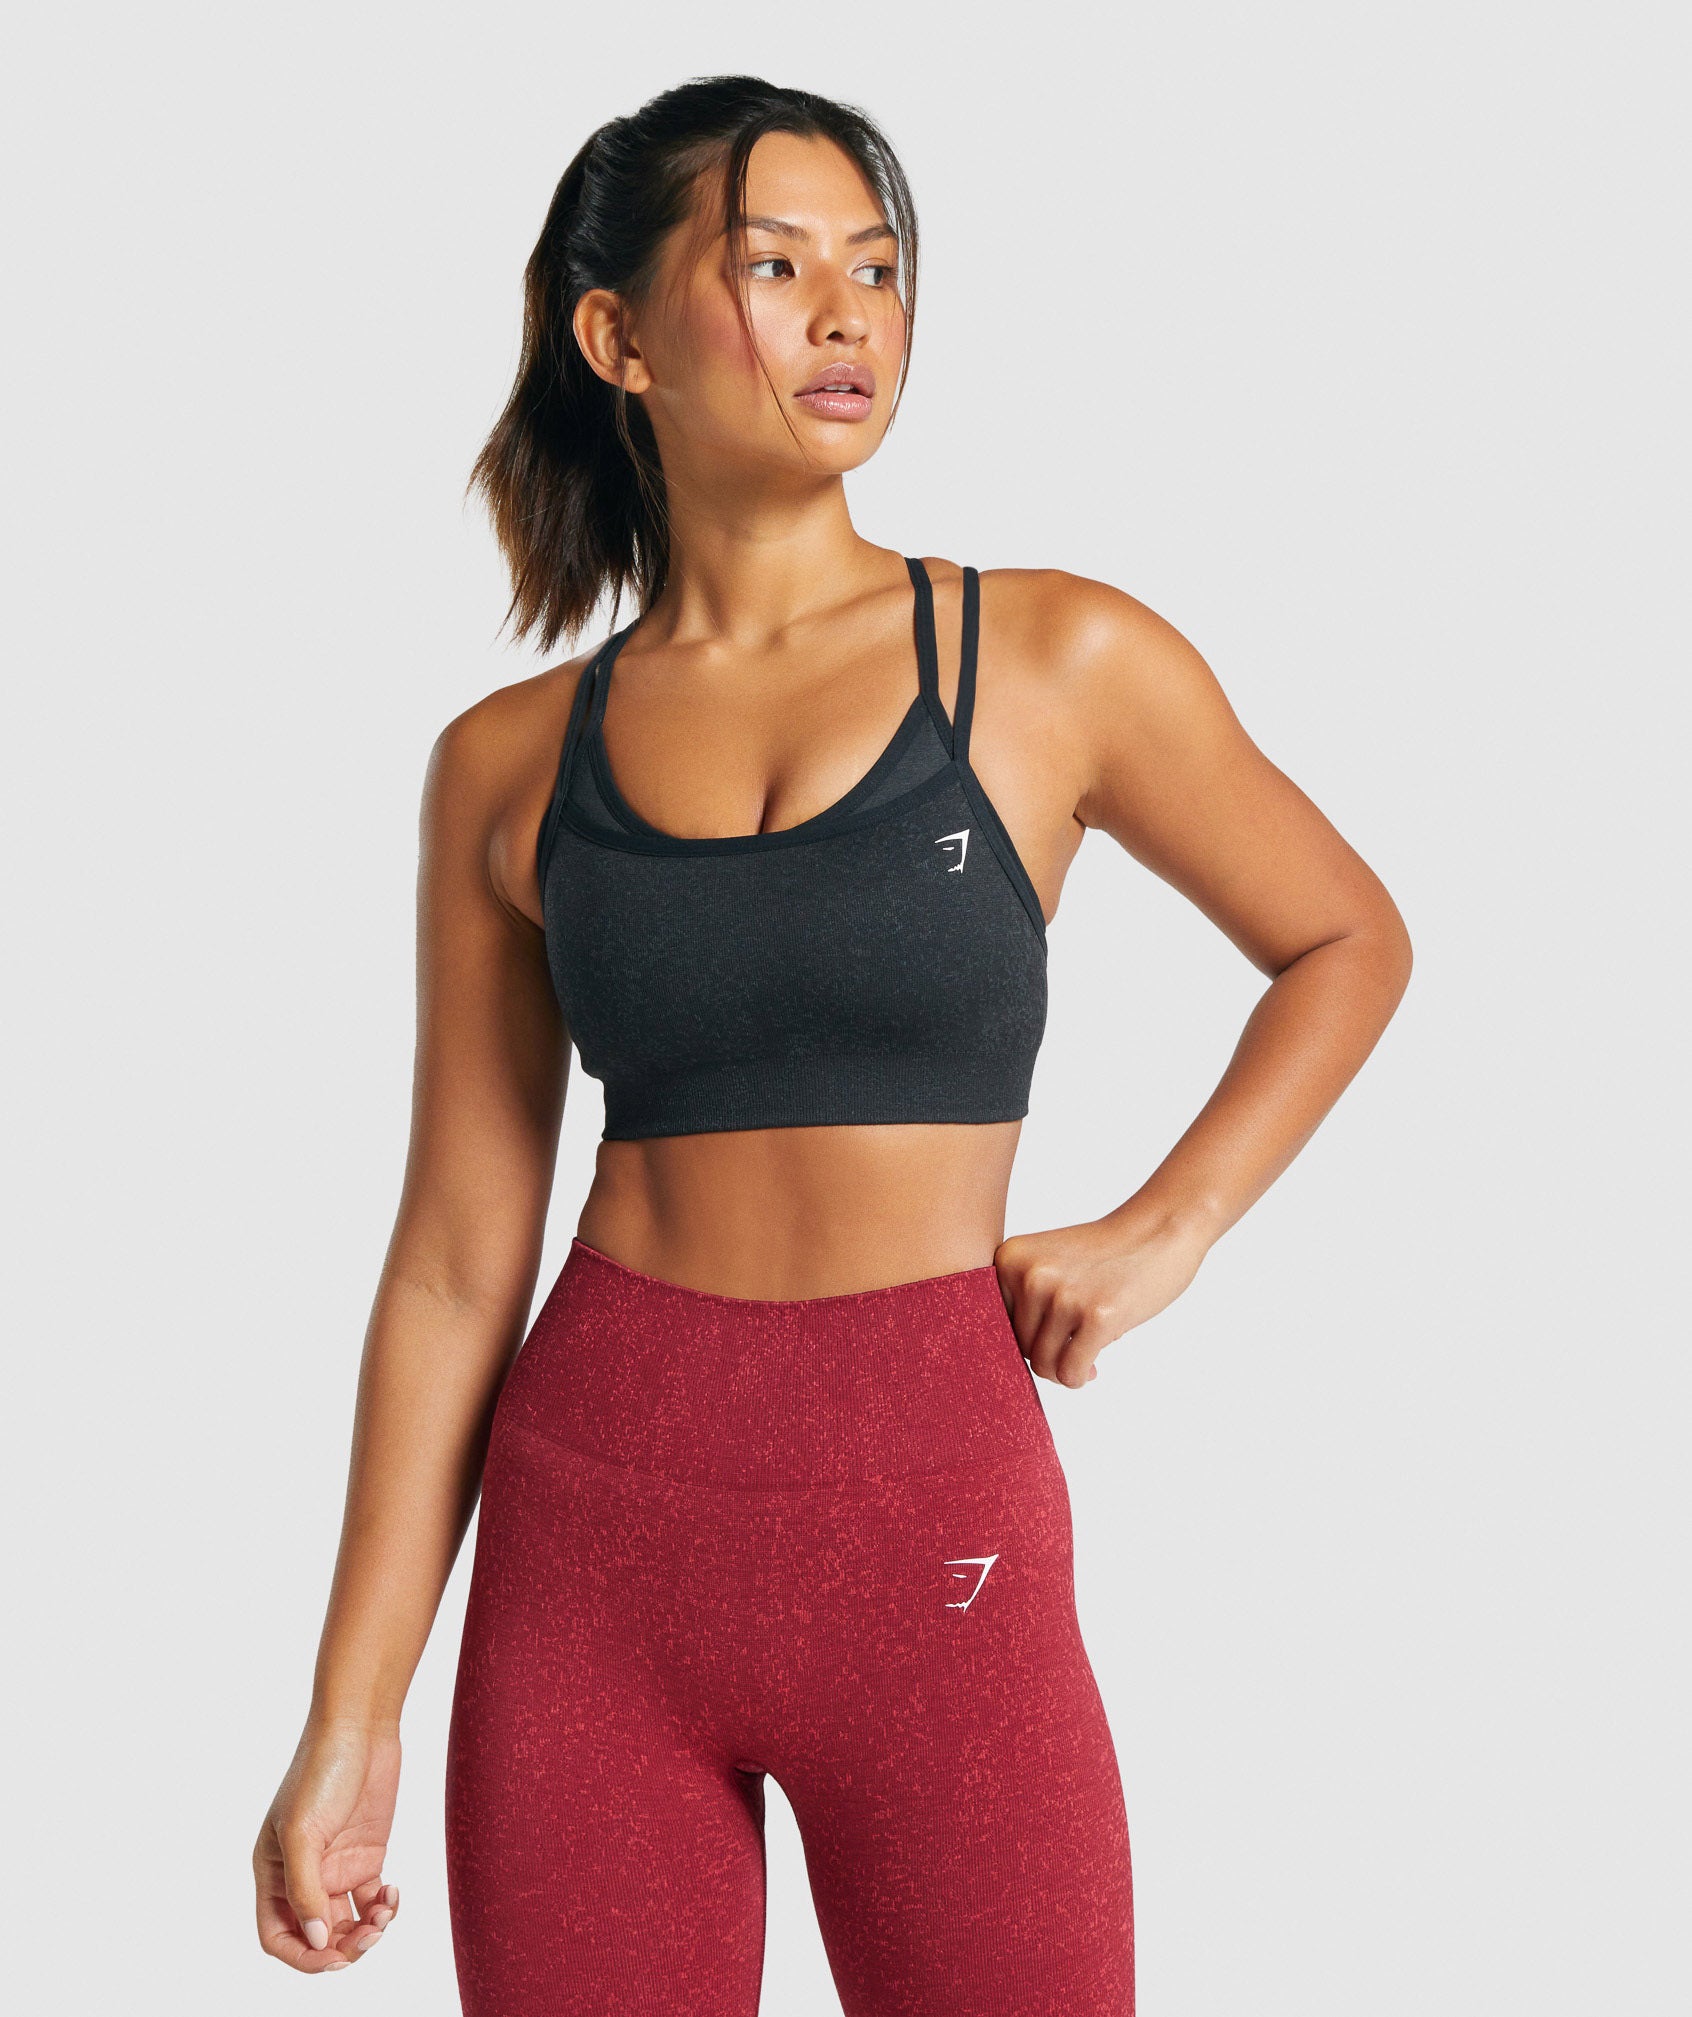 Gymshark Ruched Sports Bra Black - $27 (22% Off Retail) - From Kelly